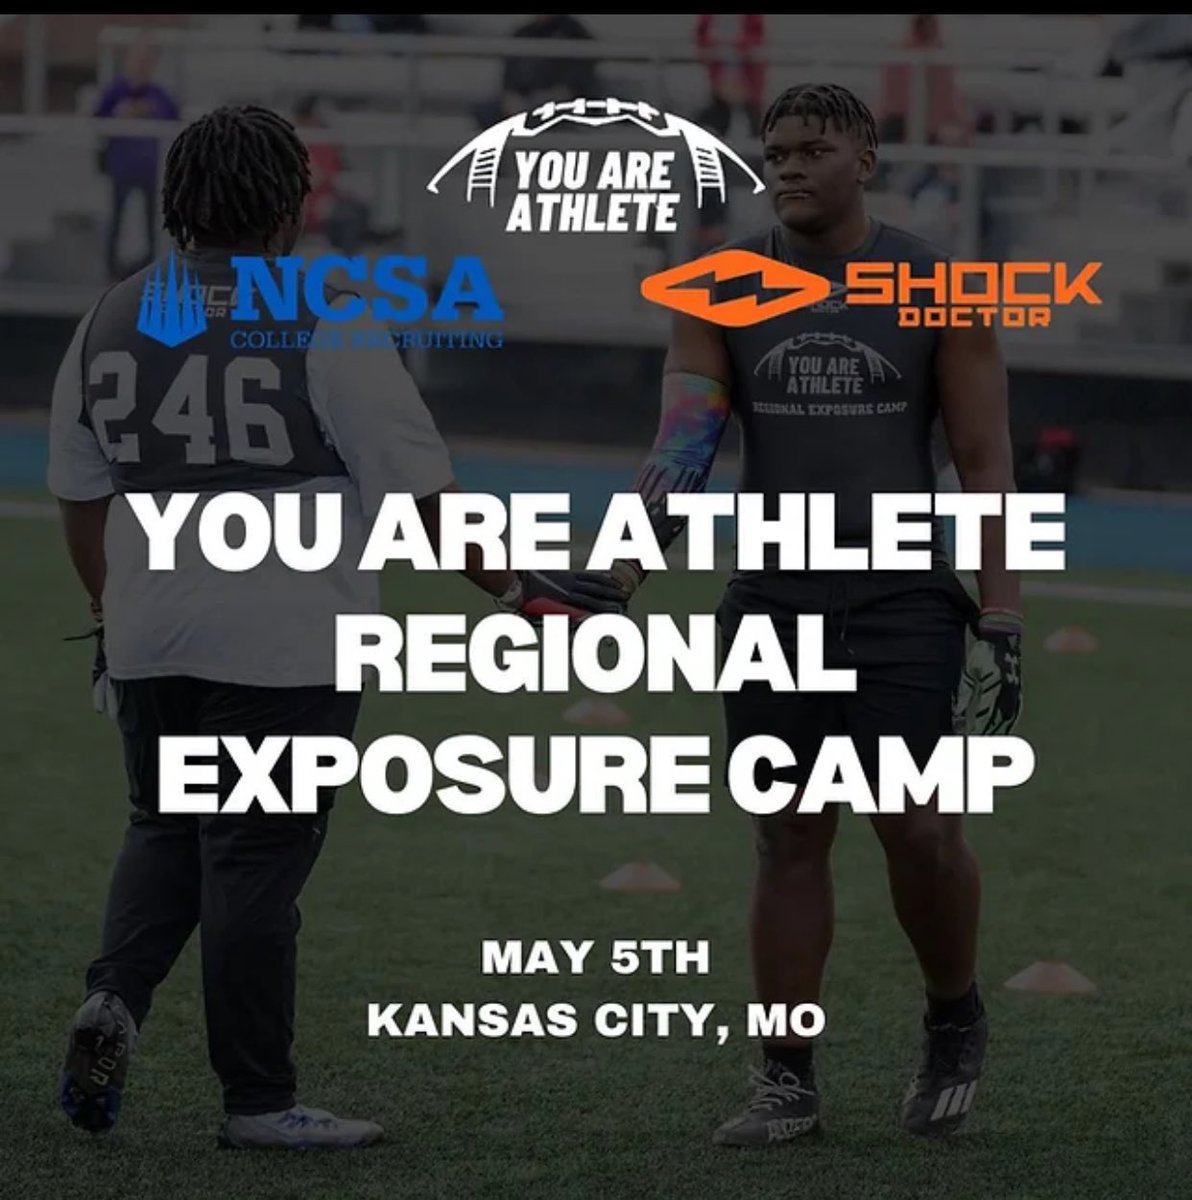 Thank you @ShockDoctor and @youareathlete for the invite! @wideouts @Houseofwideouts @PrepRedzoneNE @Rivals @JarylEllis @LNSFootball